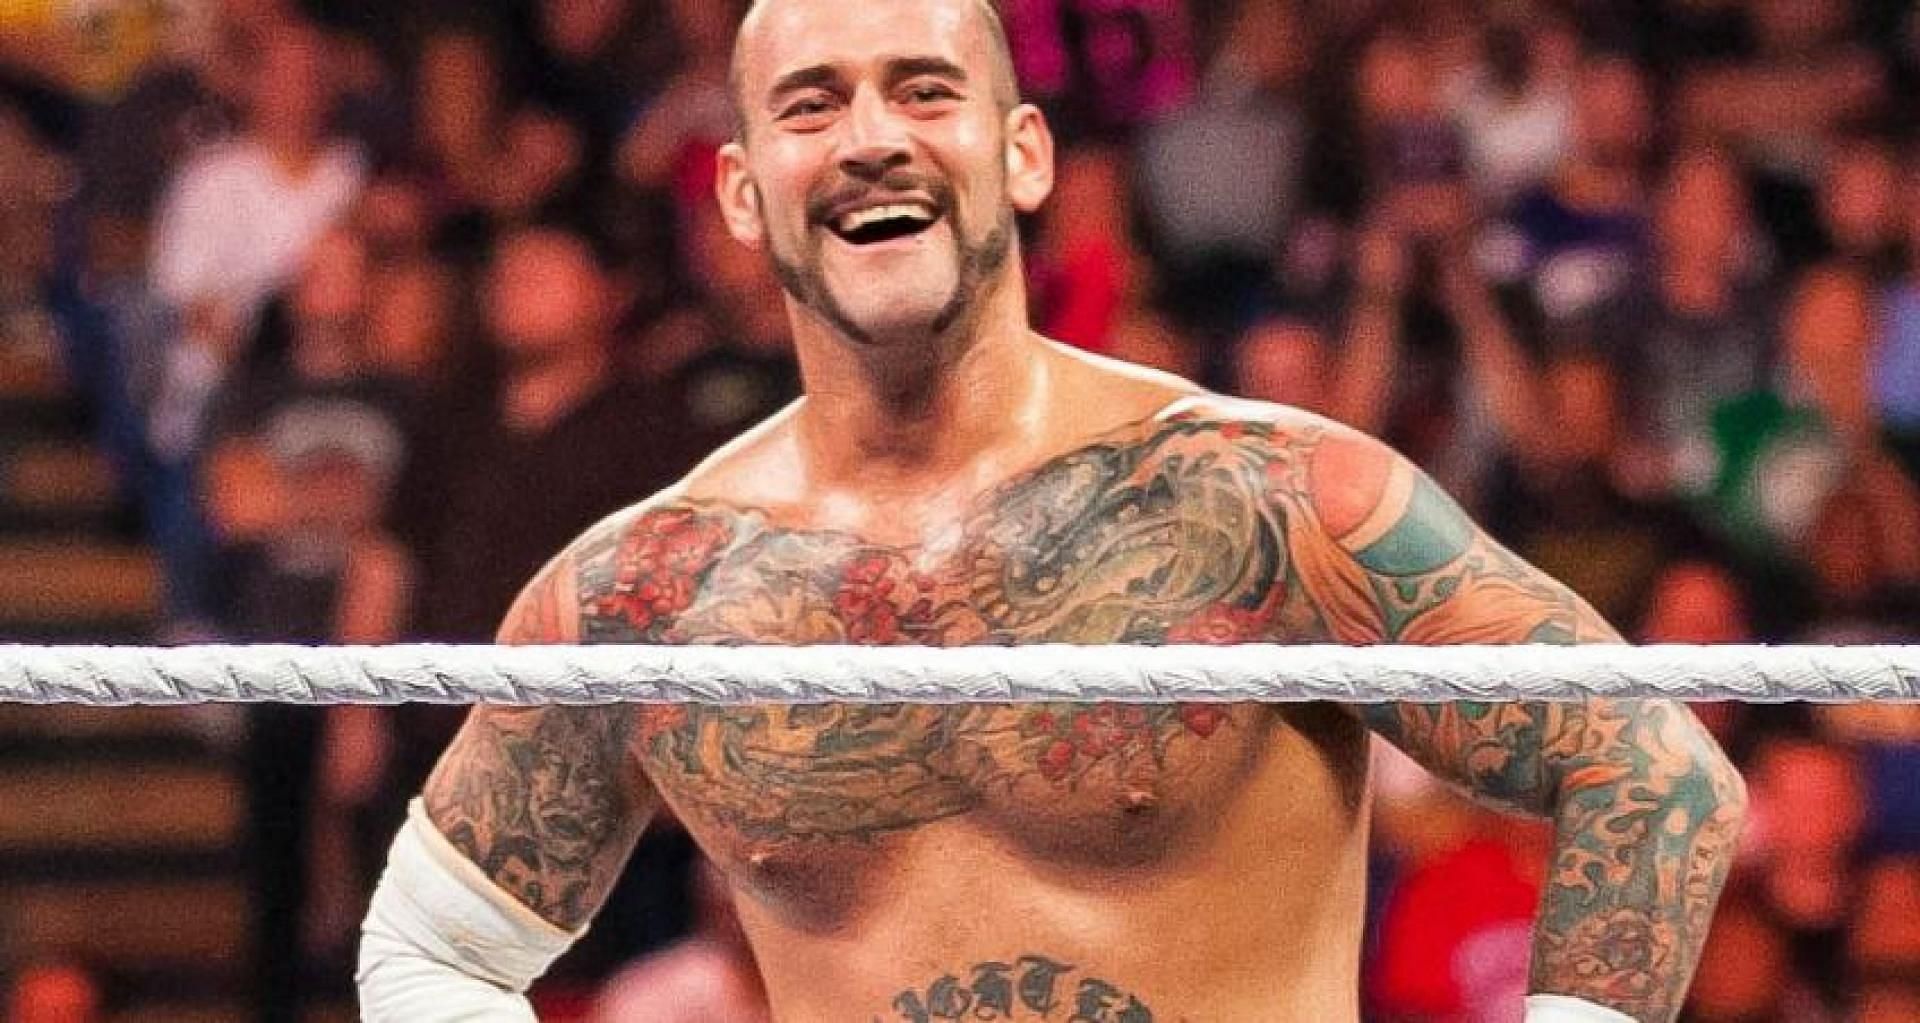 CM Punk and Swerve Strickland shared a backstage photo.